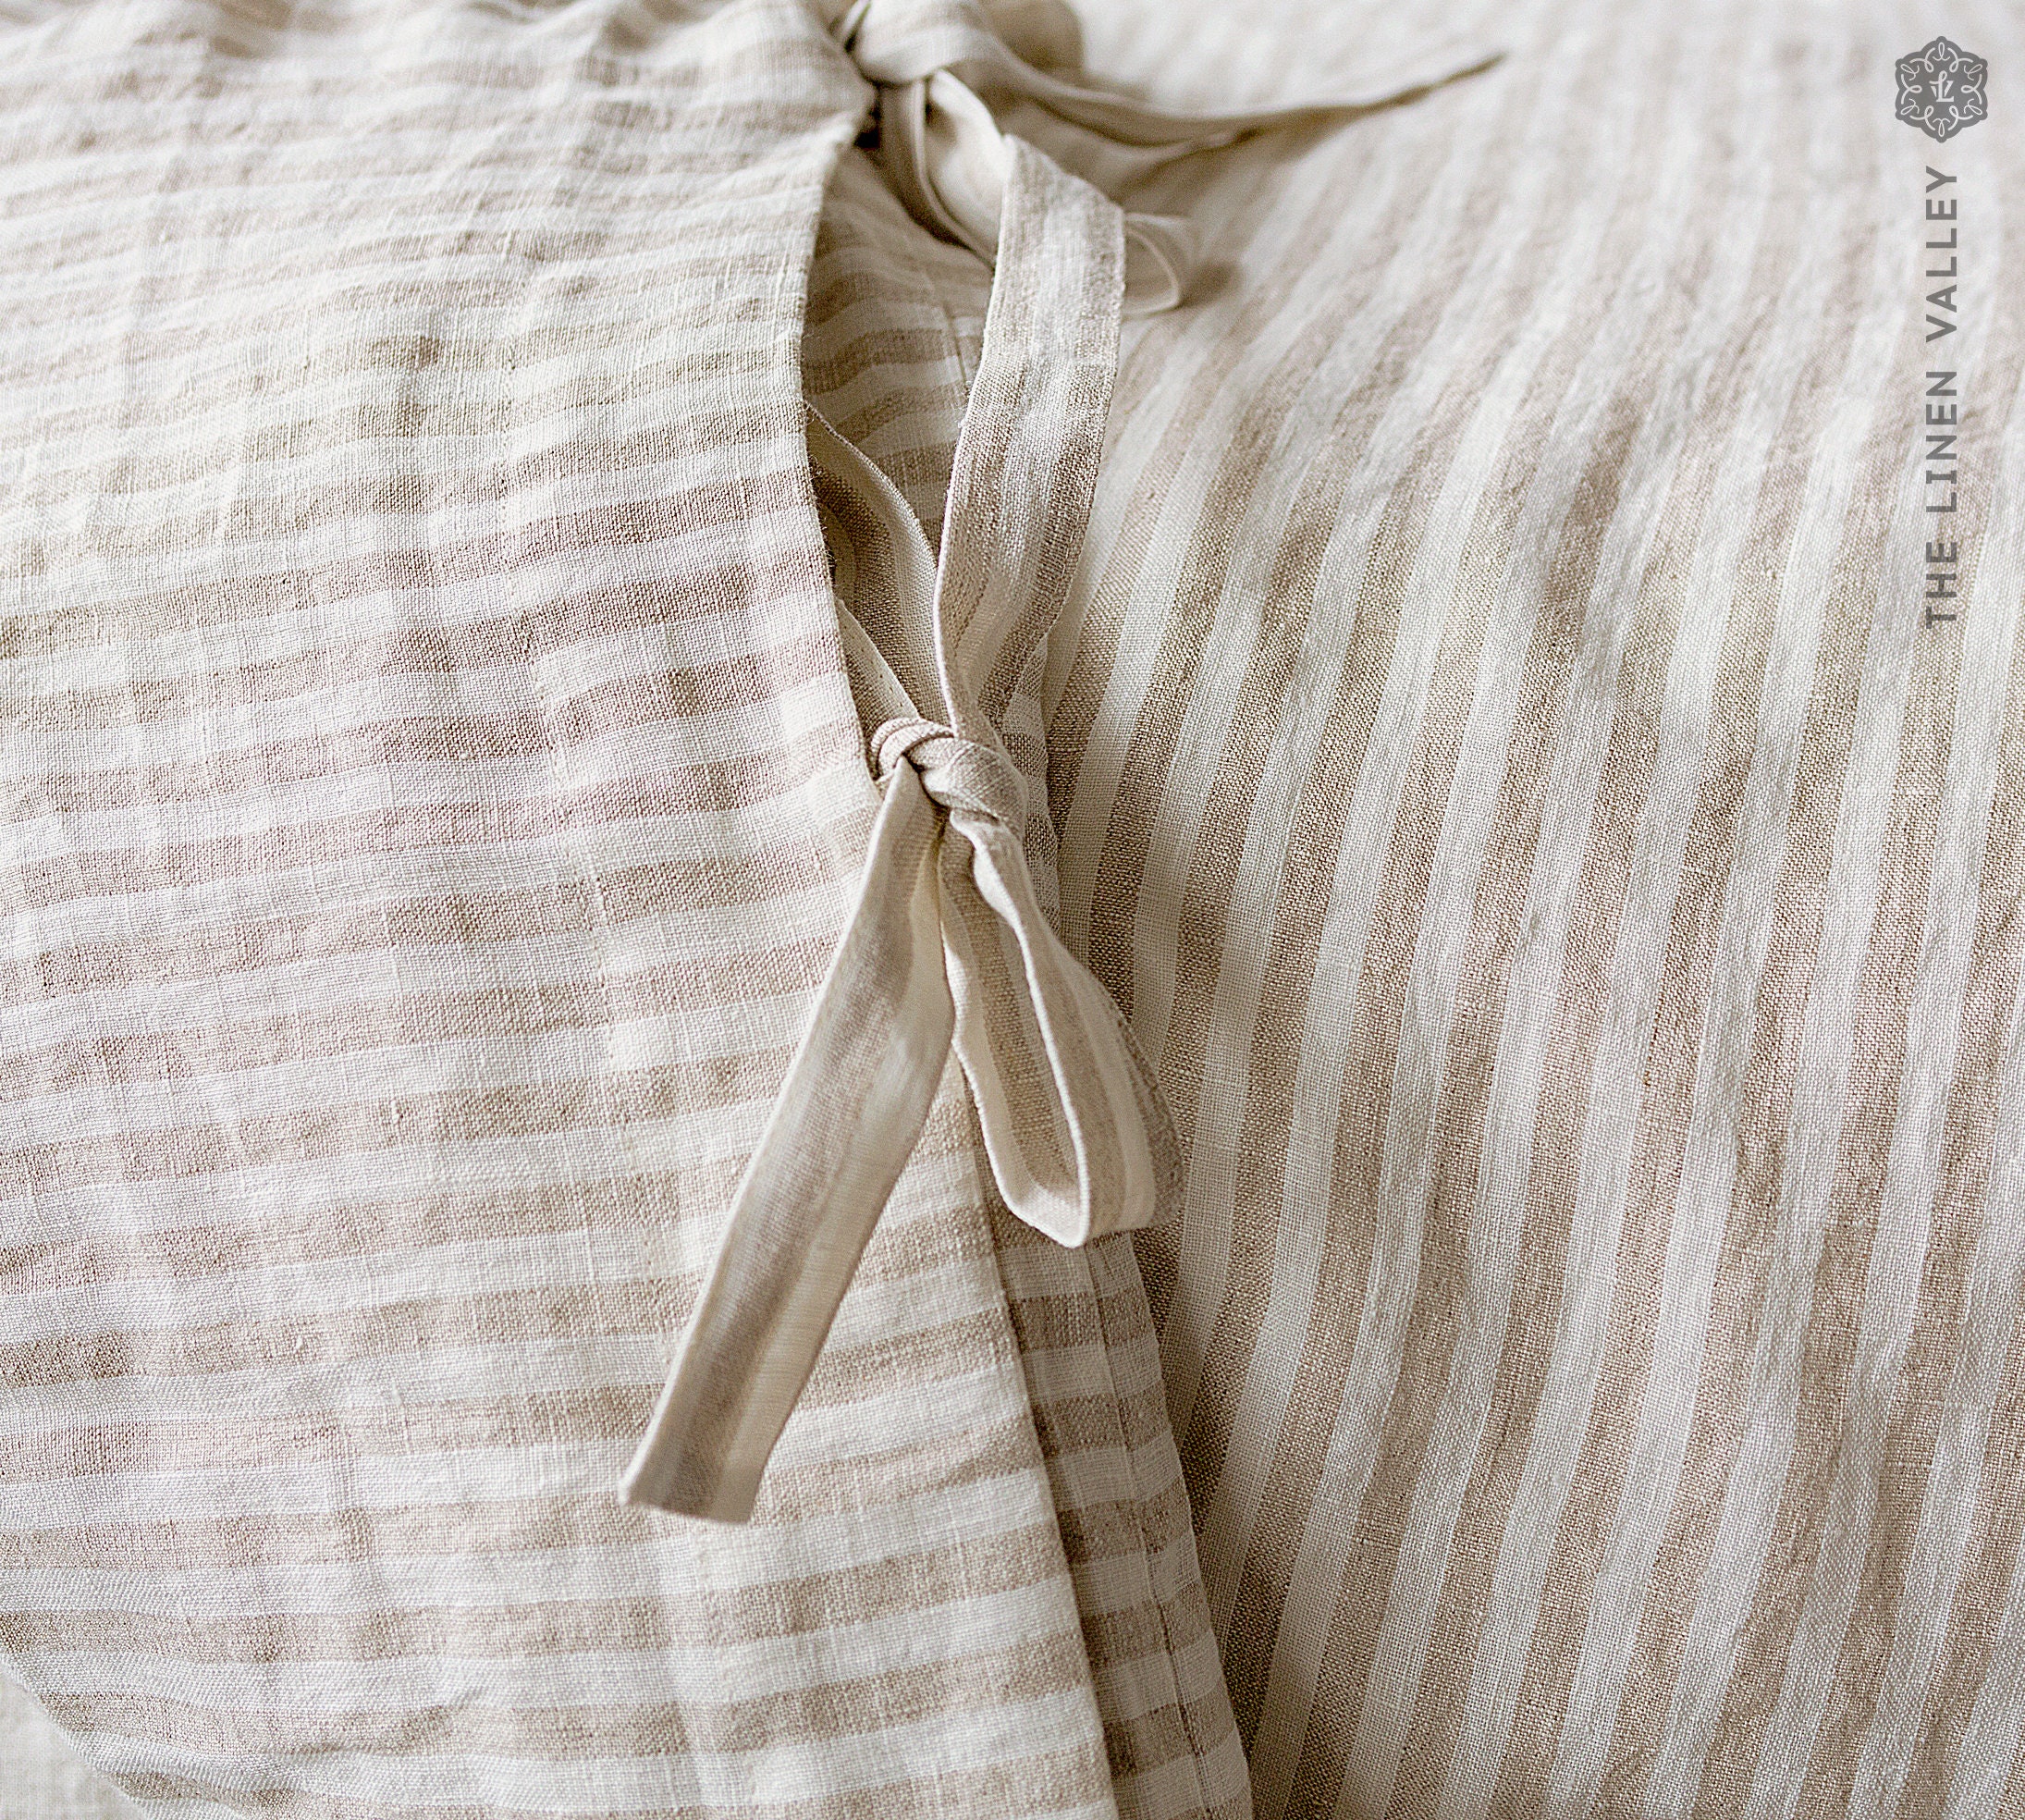 STRIPED Linen Set of Comforter Cover and Pillows off White - Etsy